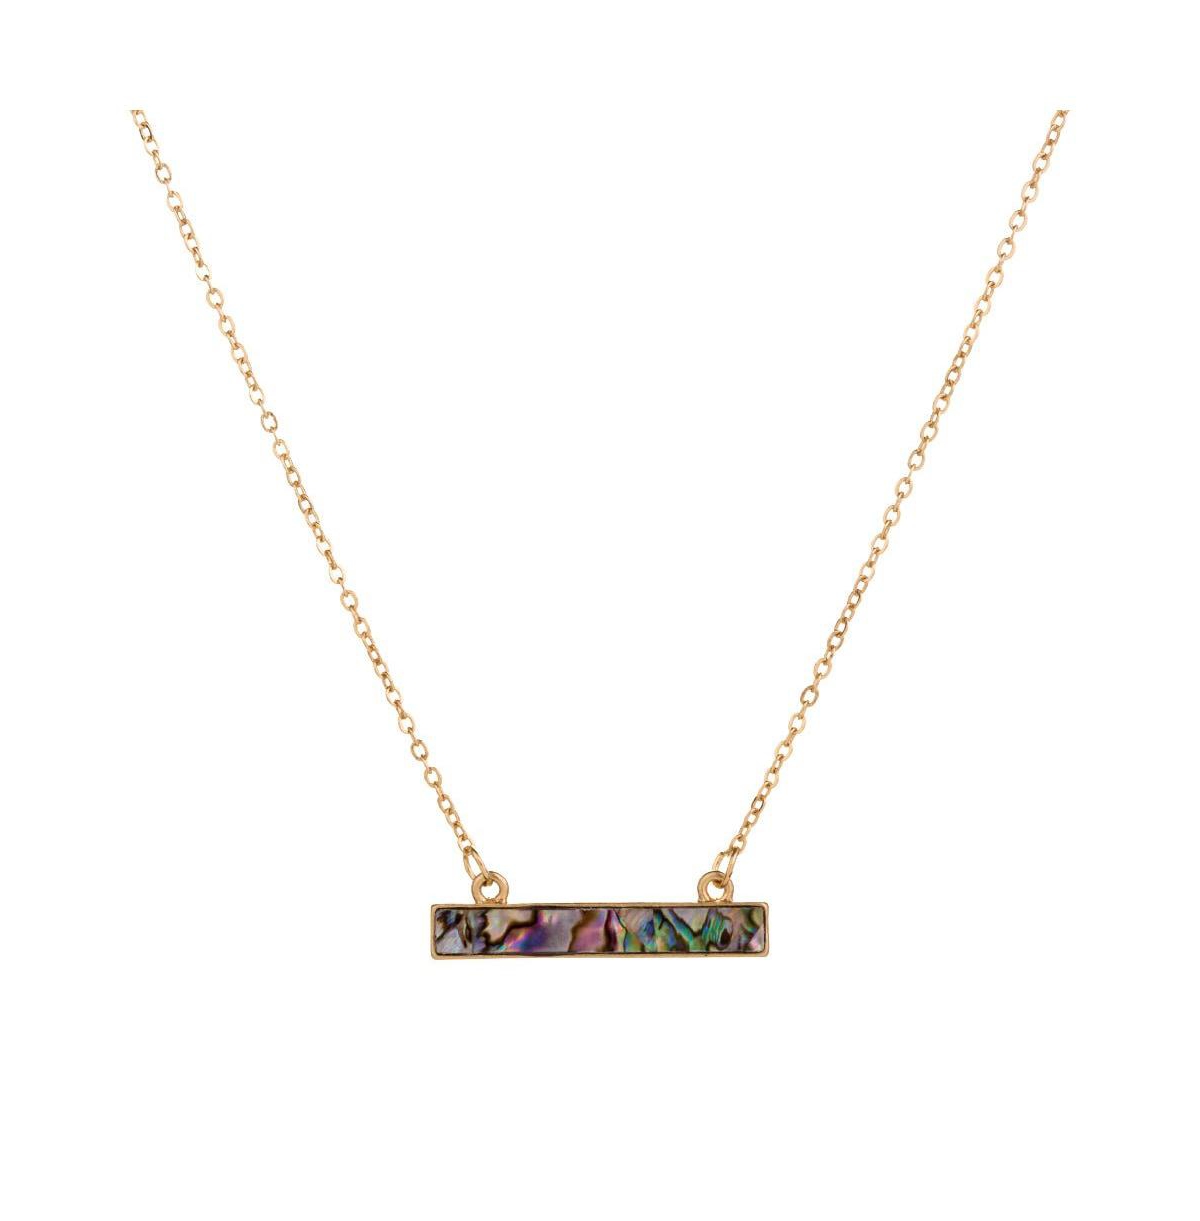 Abalone Shell Necklace - Gold